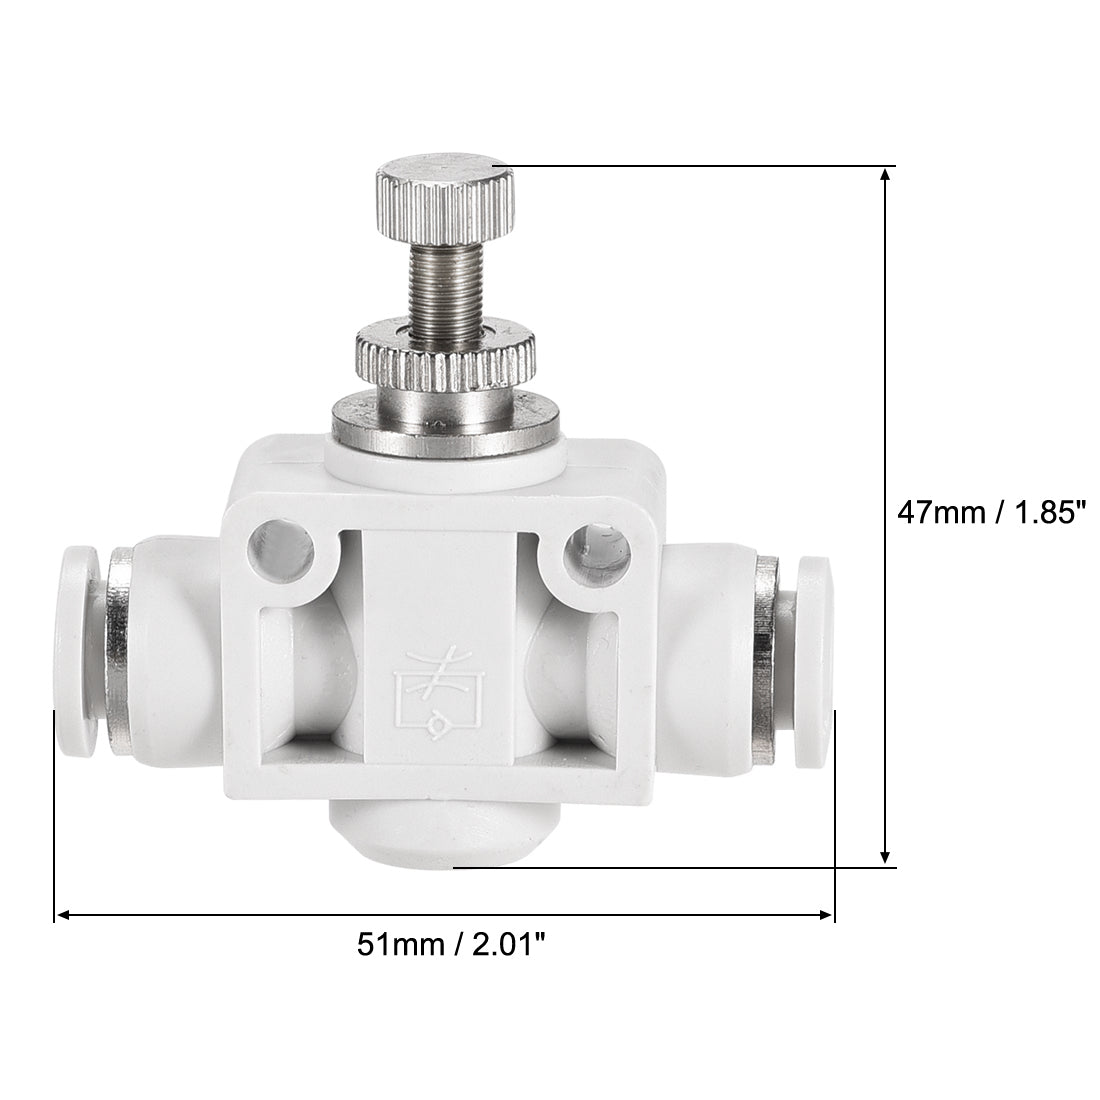 uxcell Uxcell Air Flow Control Valve, In-line Speed Controller Union Straight, 8mm Tube Outer Diameter